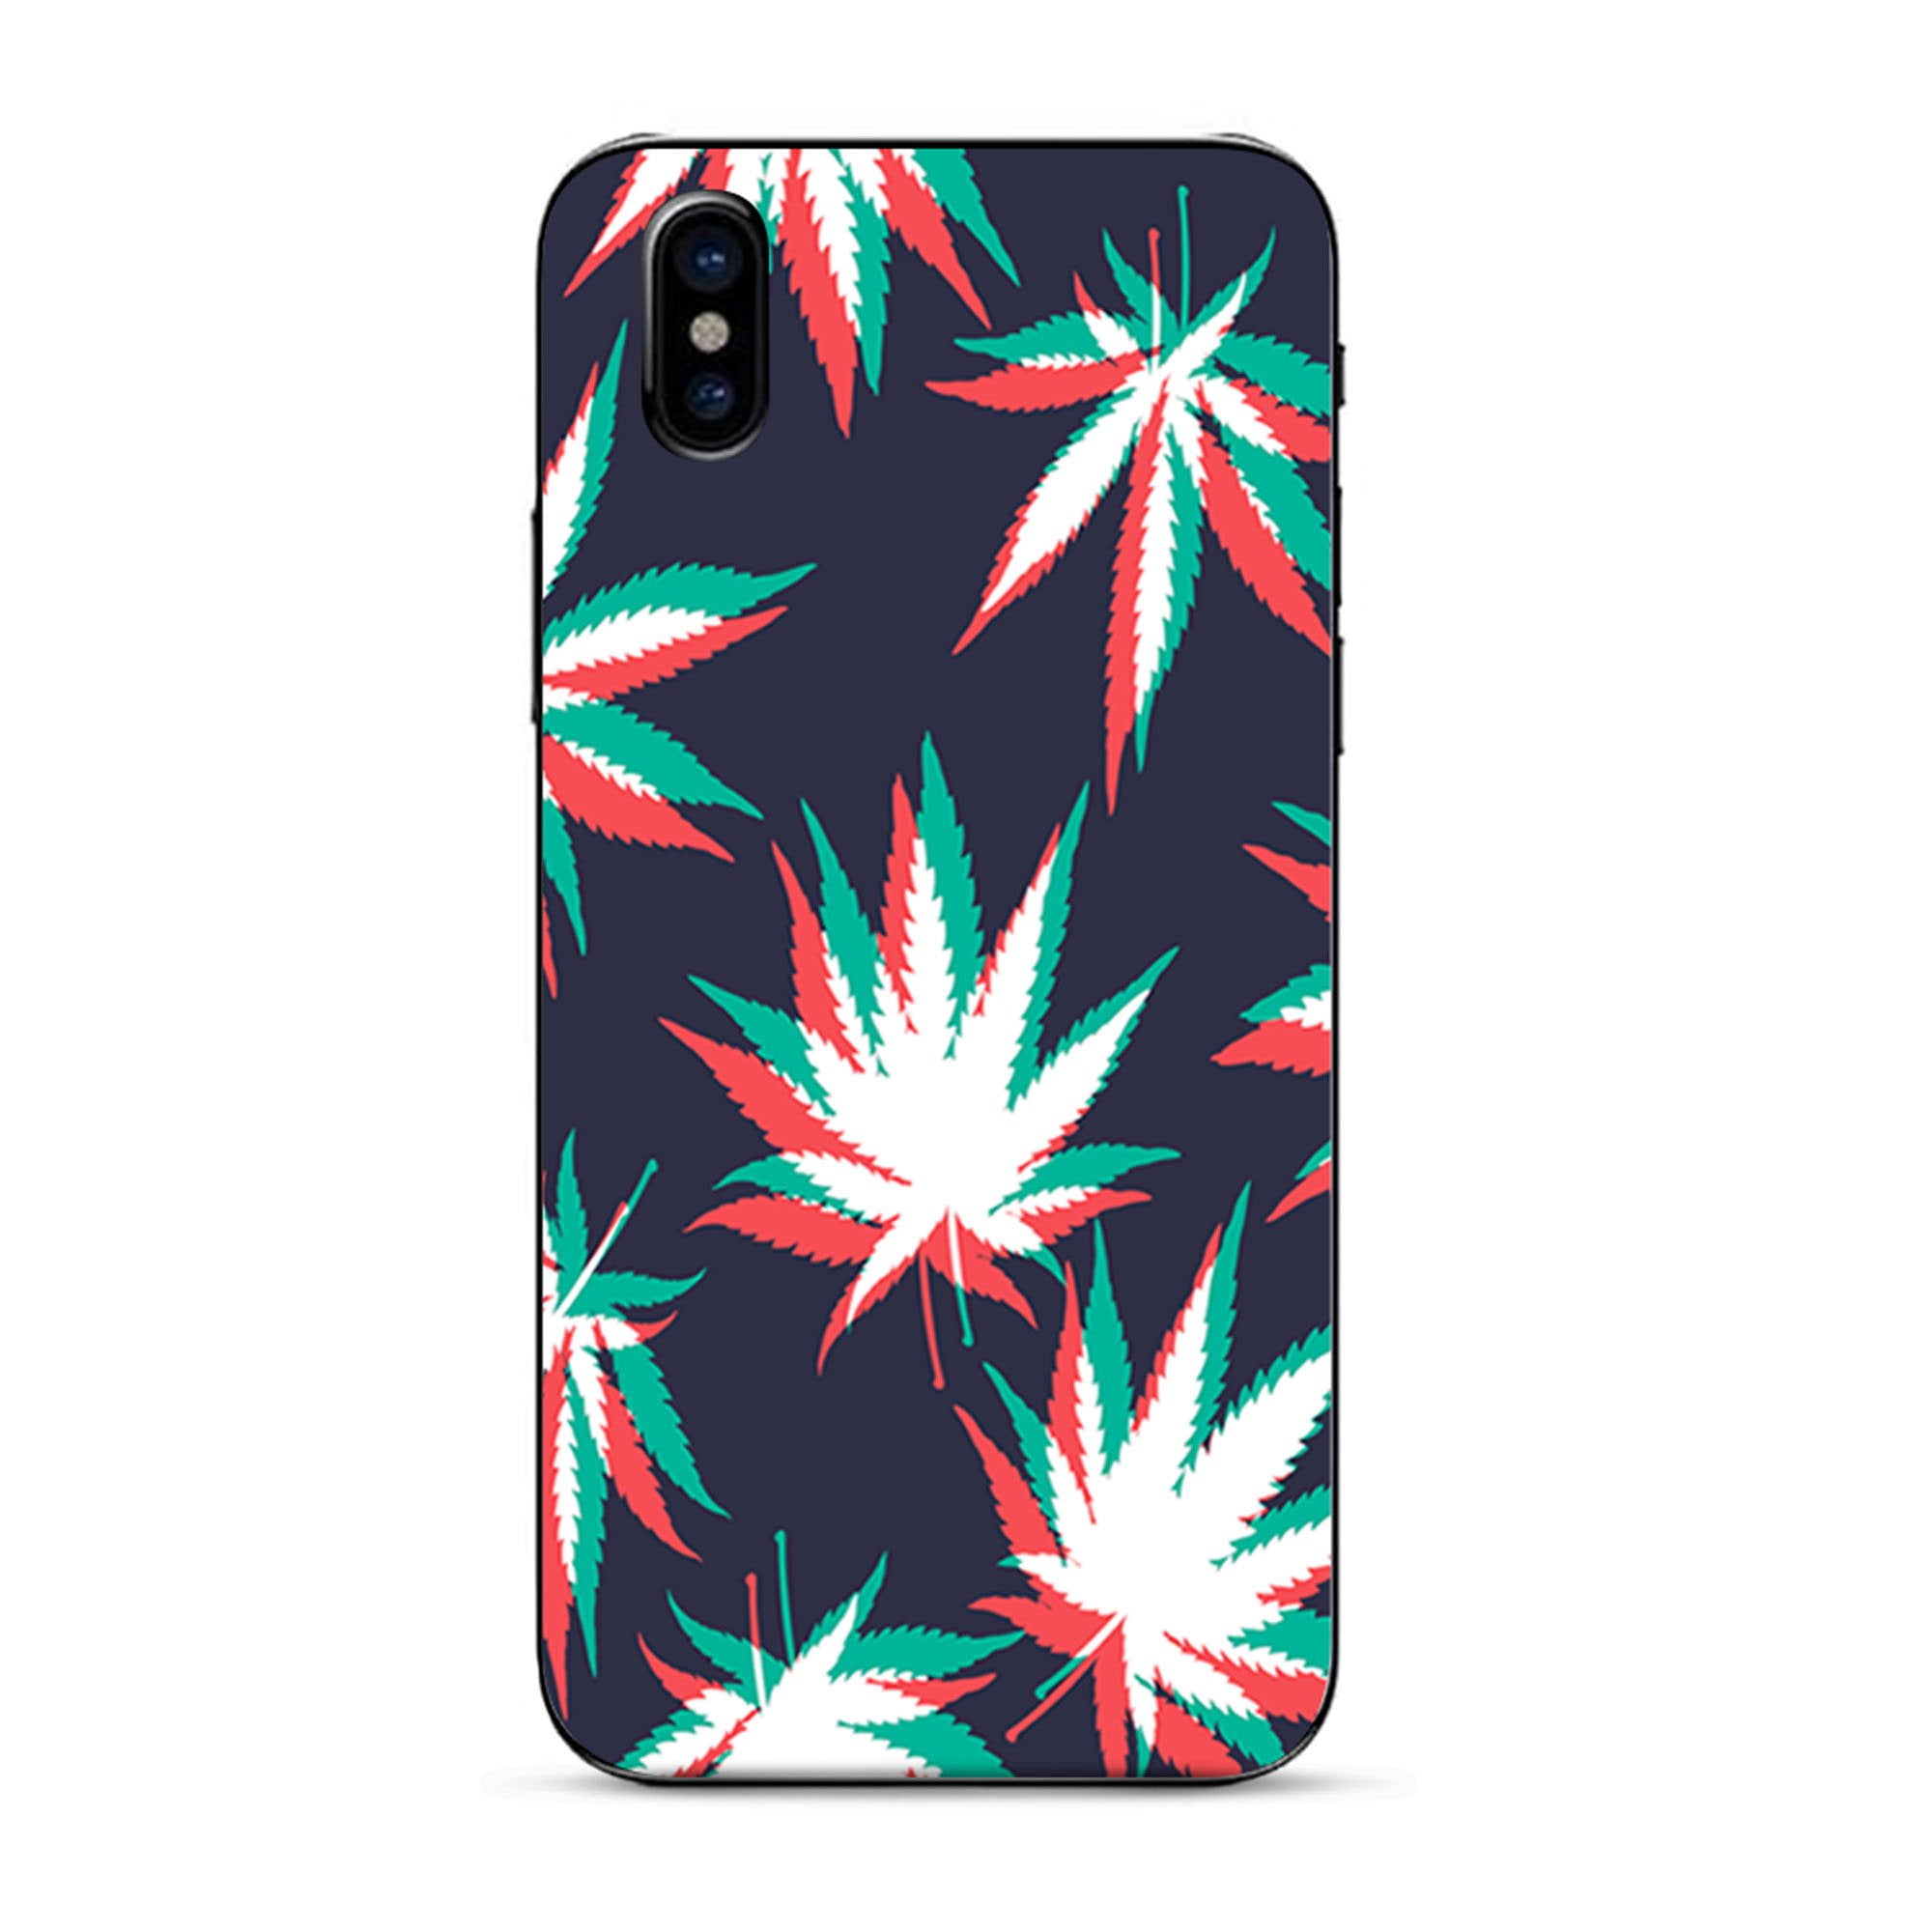 Skin for iPhone X Skins Decal Vinyl Wrap Stickers Cover - 3D ...